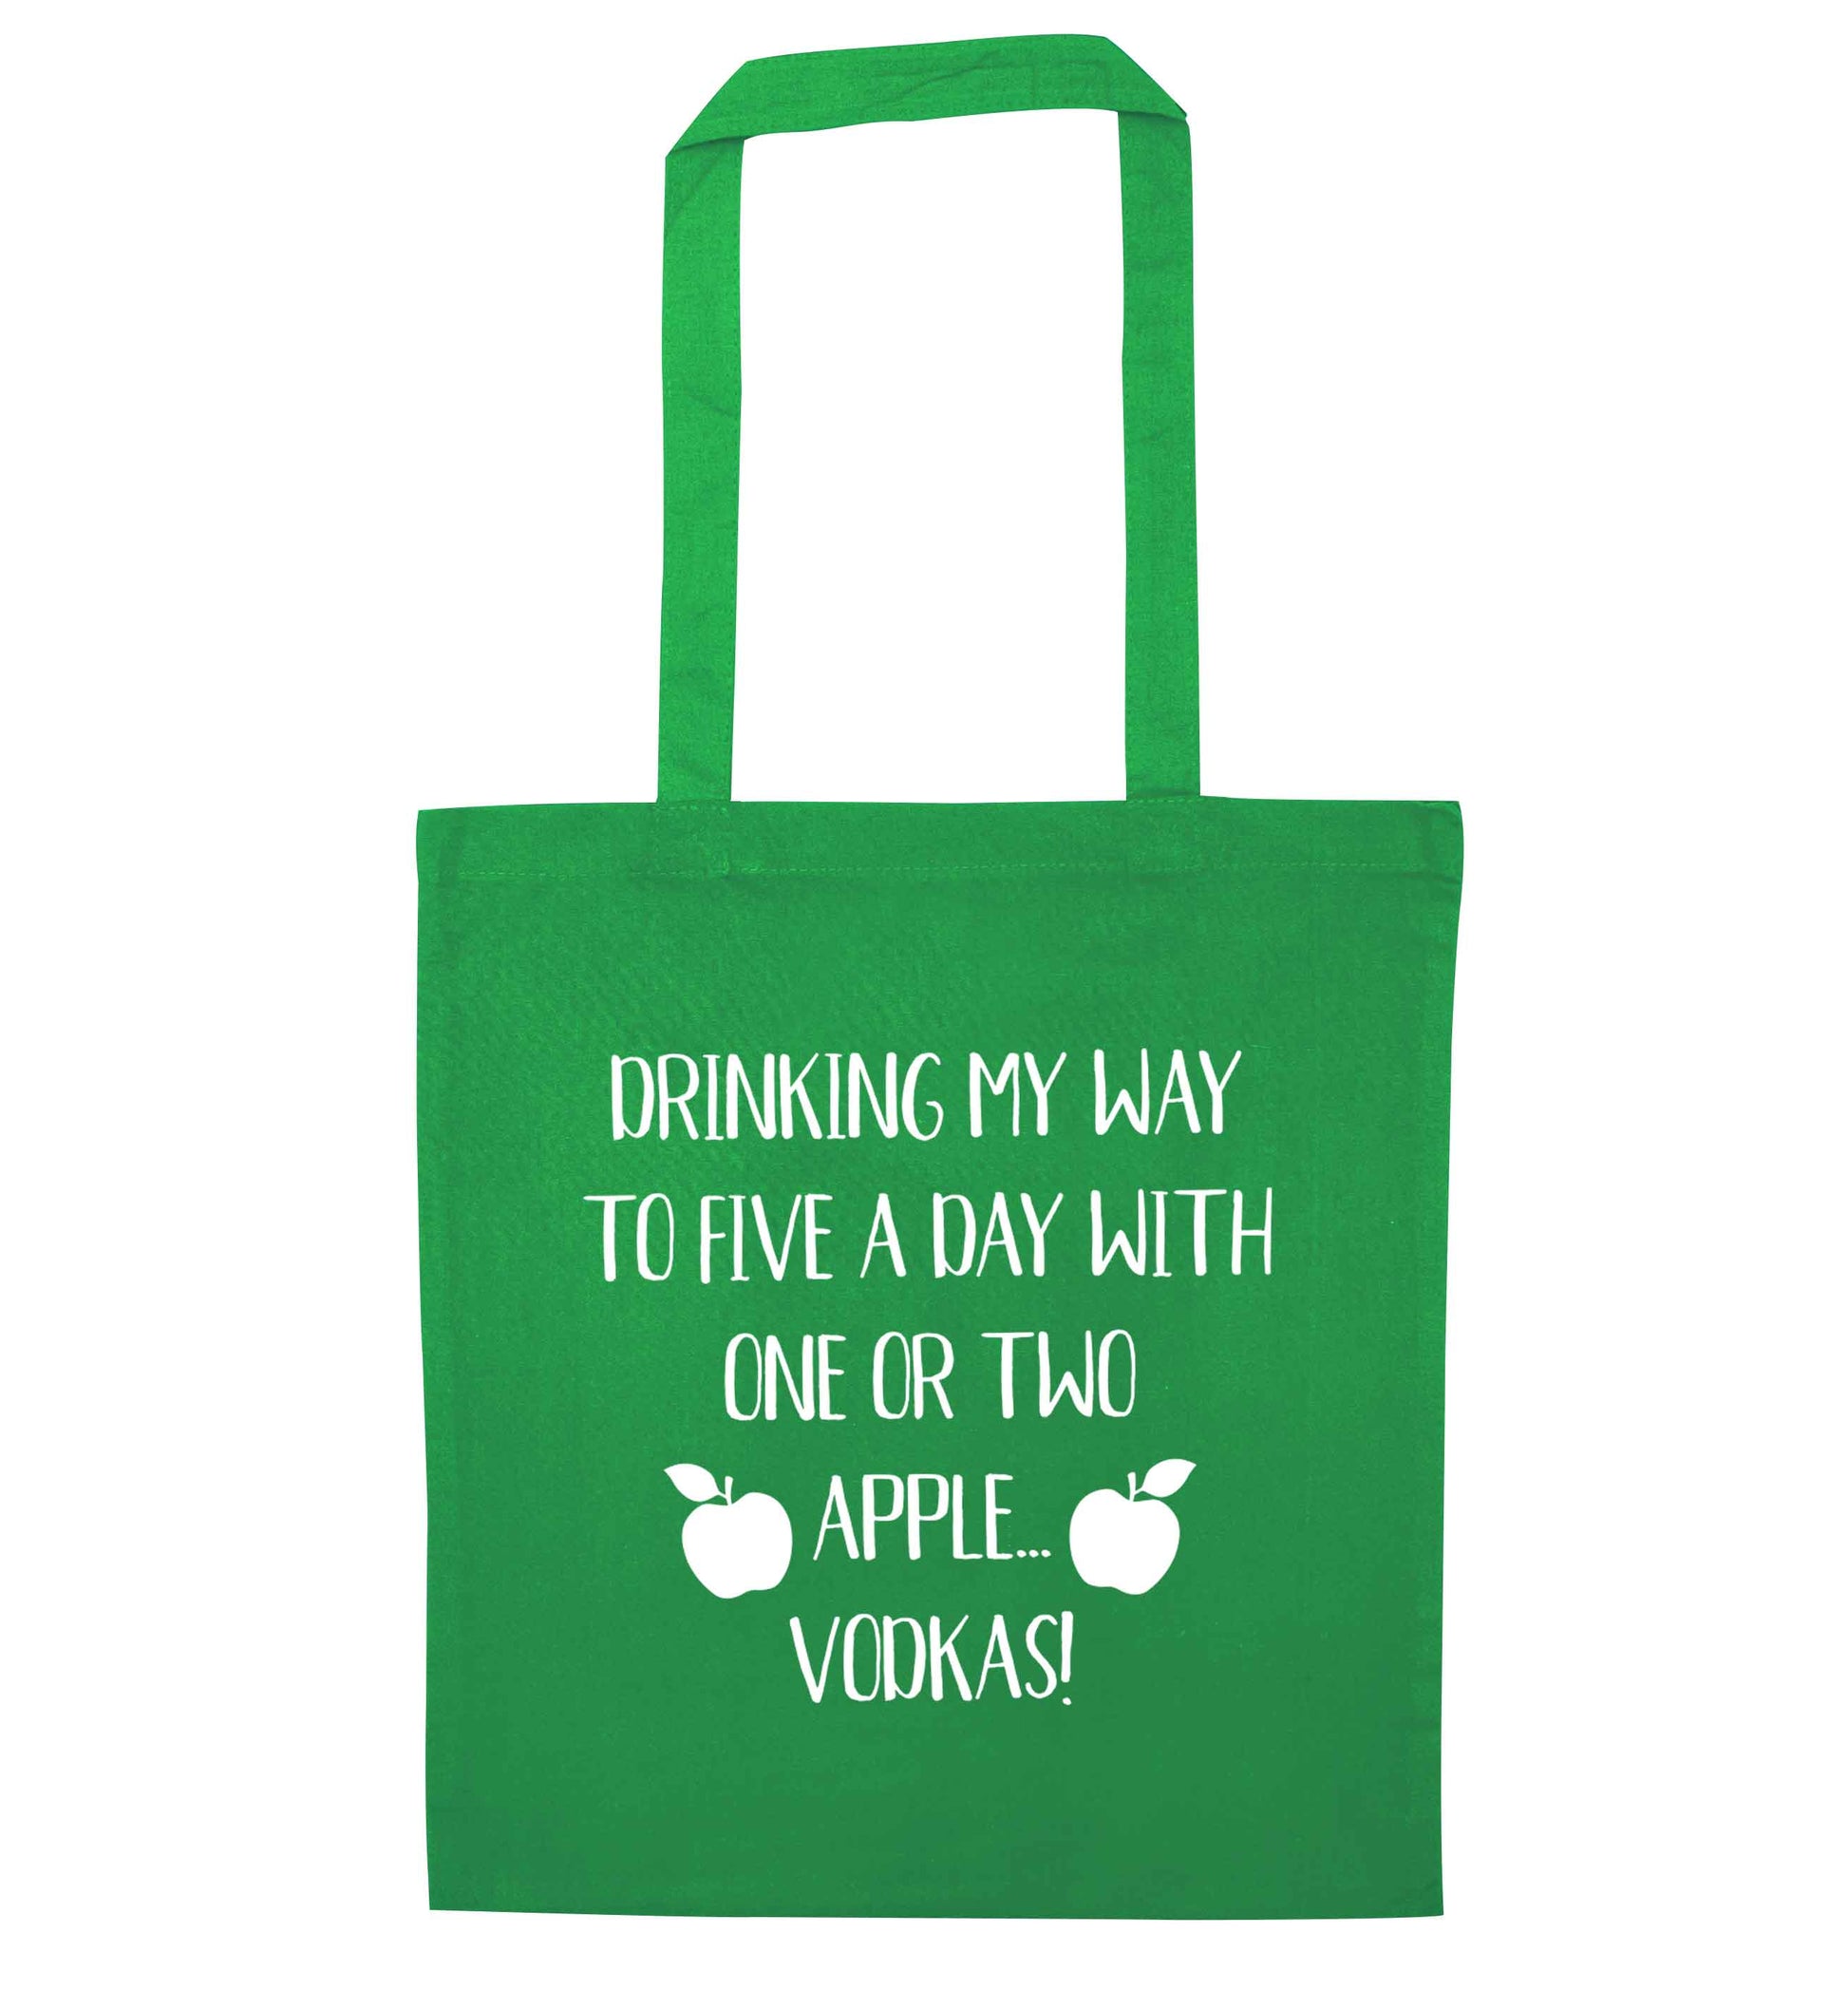 Drinking my way to five a day with one or two apple vodkas green tote bag